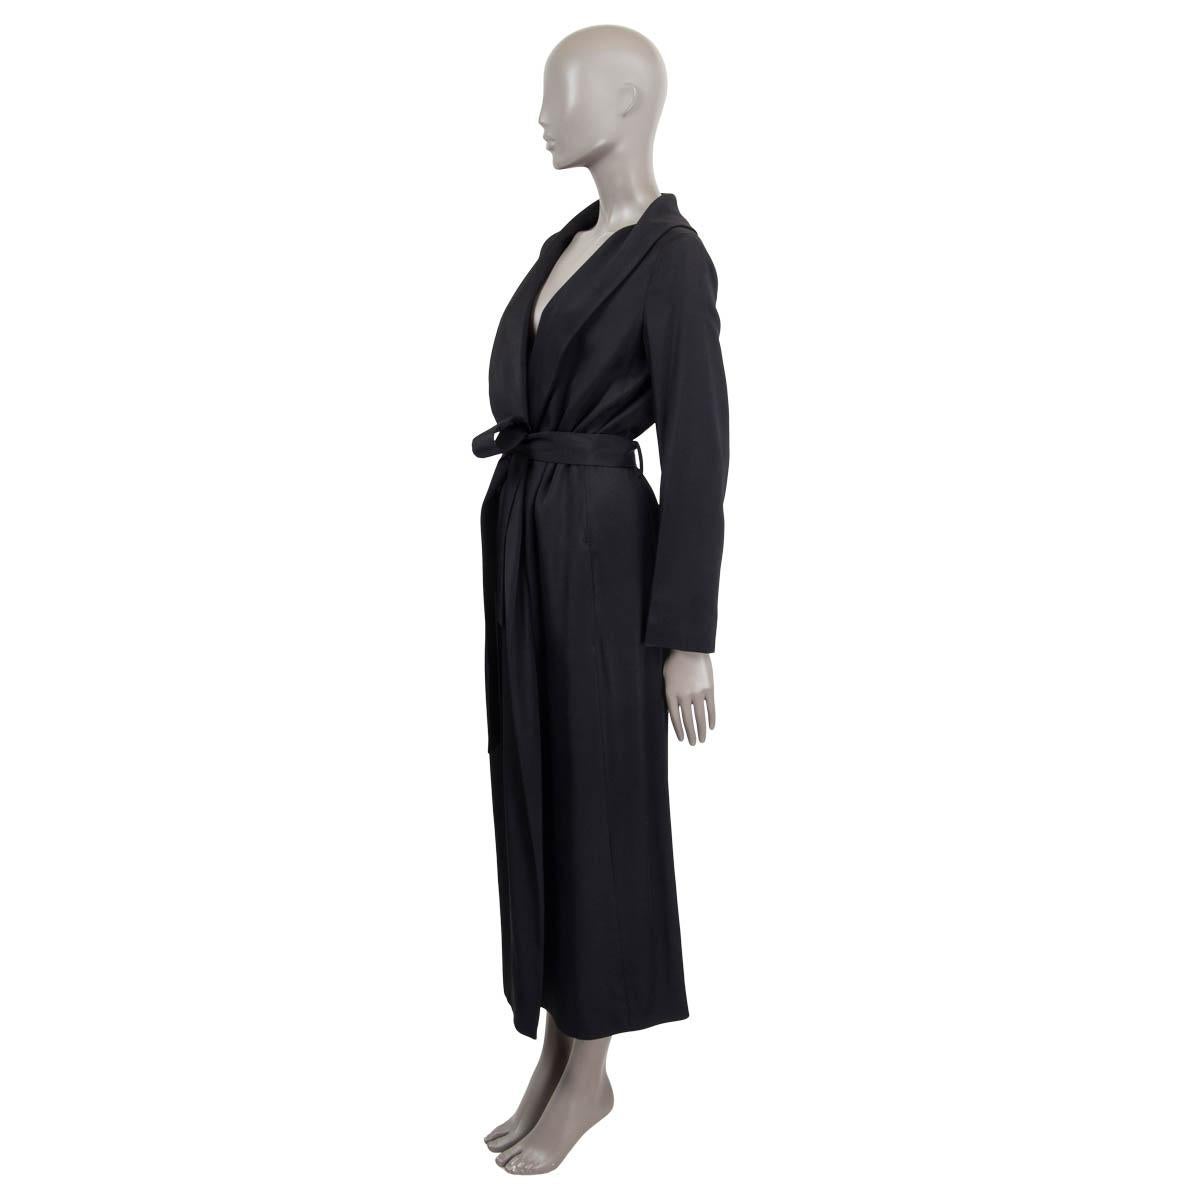 100% authentic The Row classic long coat in black viscose (96%) and elastane (4%). Closes only with a belt for a wrap illusion. Open pockets on the side. Unlined. Has been worn and is in excellent condition.

Measurements
Tag Size	4
Size	S
Shoulder